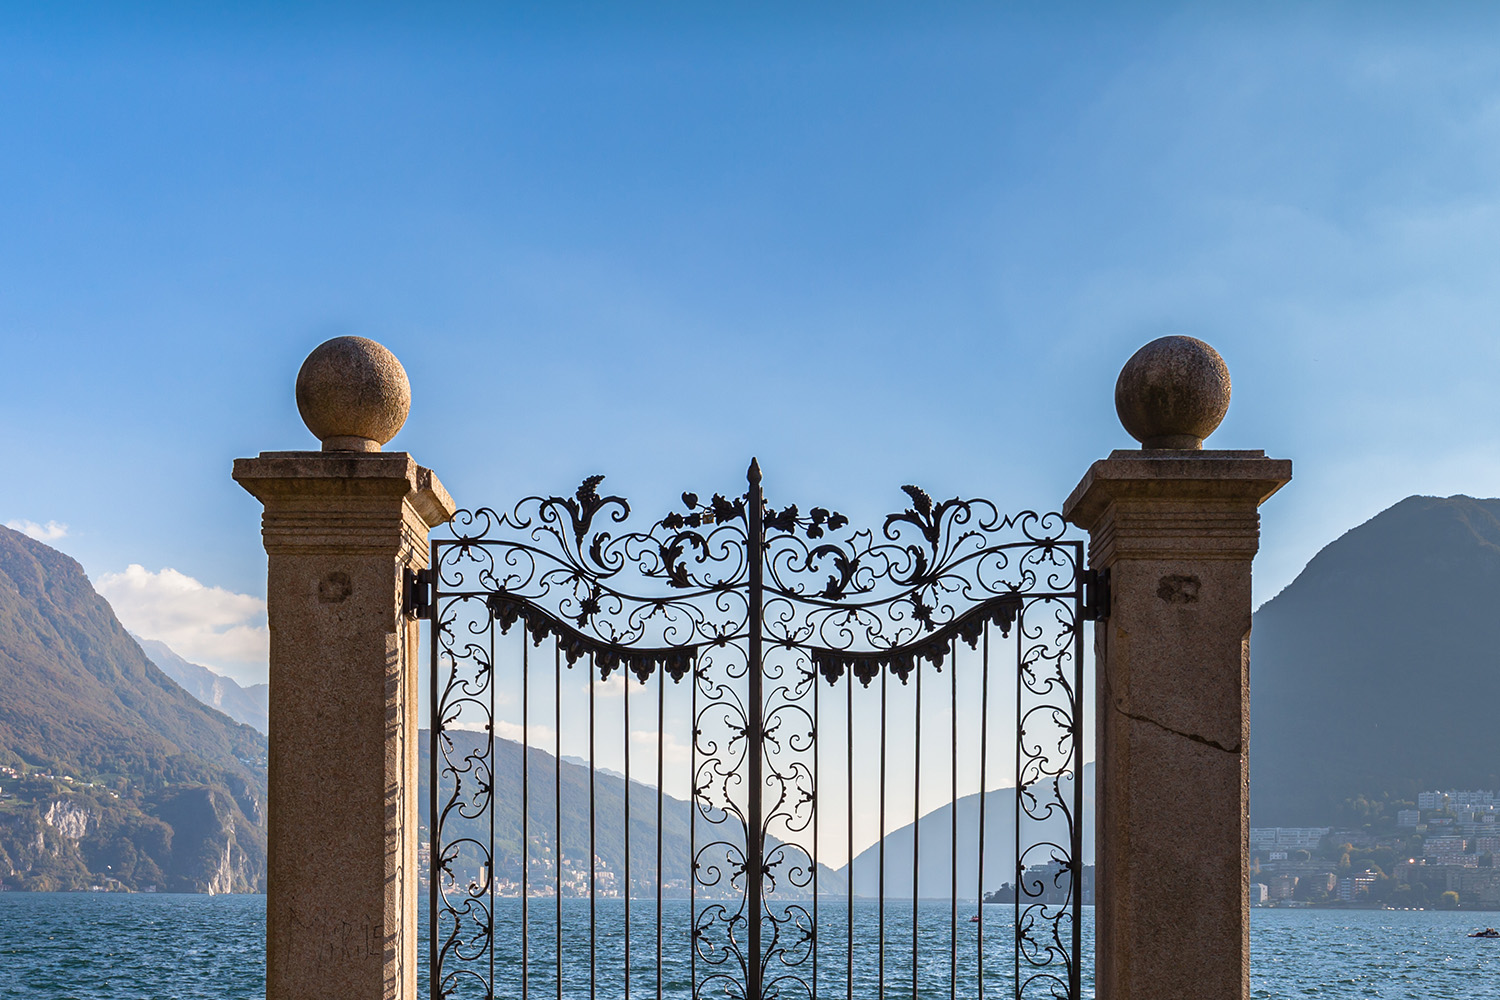 2 posts and luxury rod iron gate that opens to the ocean and mountains.